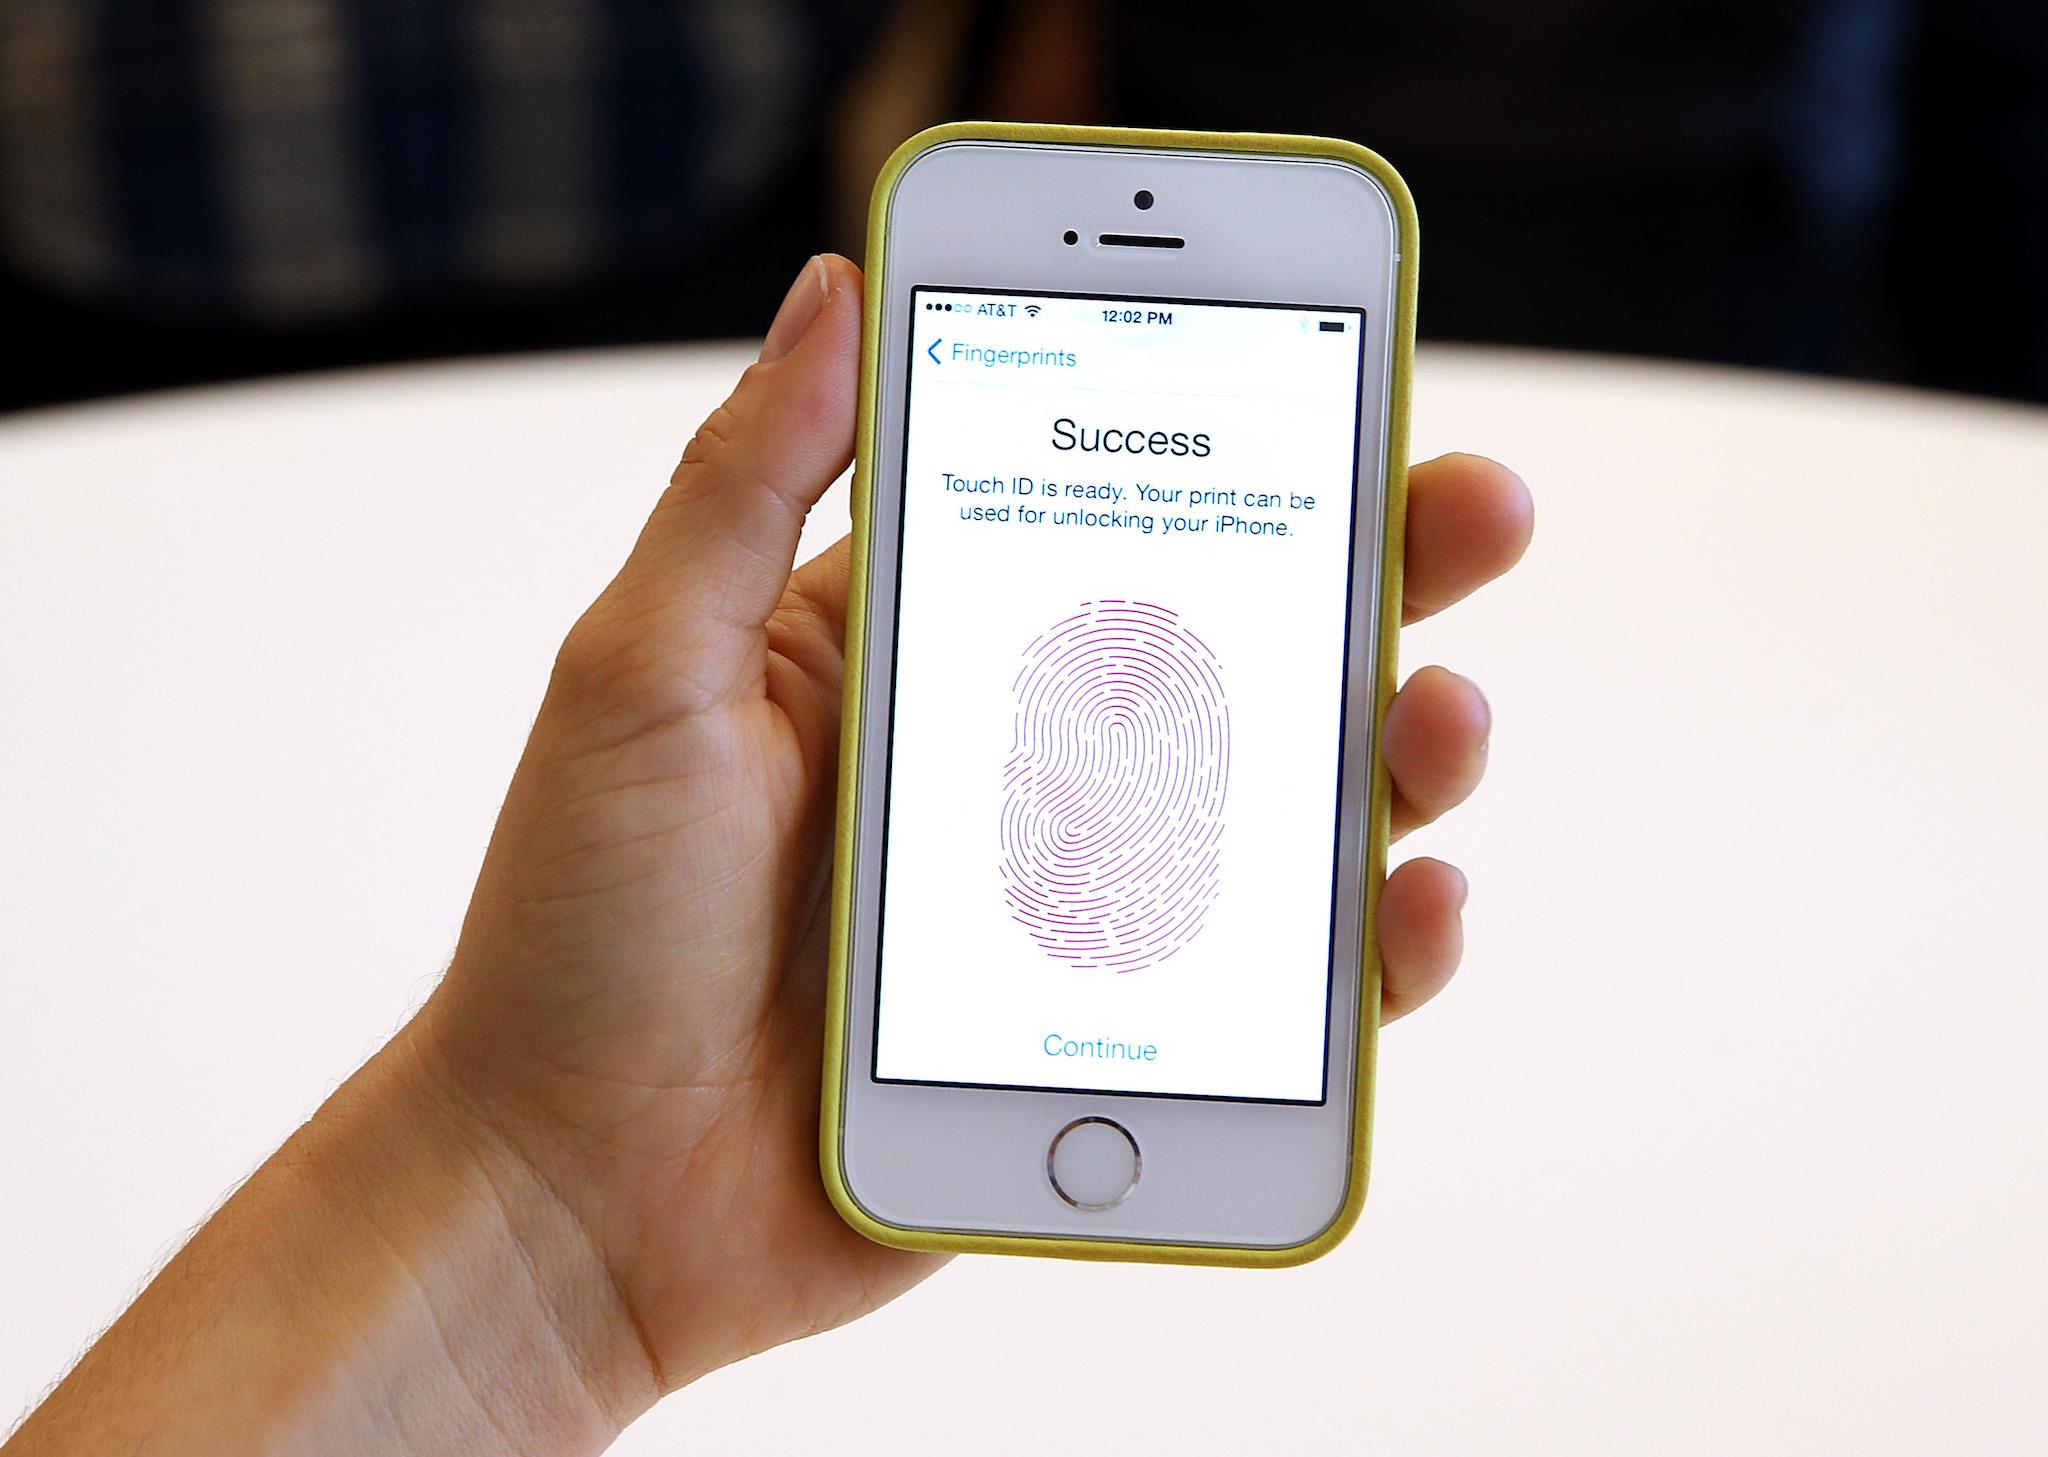 The iPhone 5S with fingerprint technology is shown at its product announcement at the Apple campus